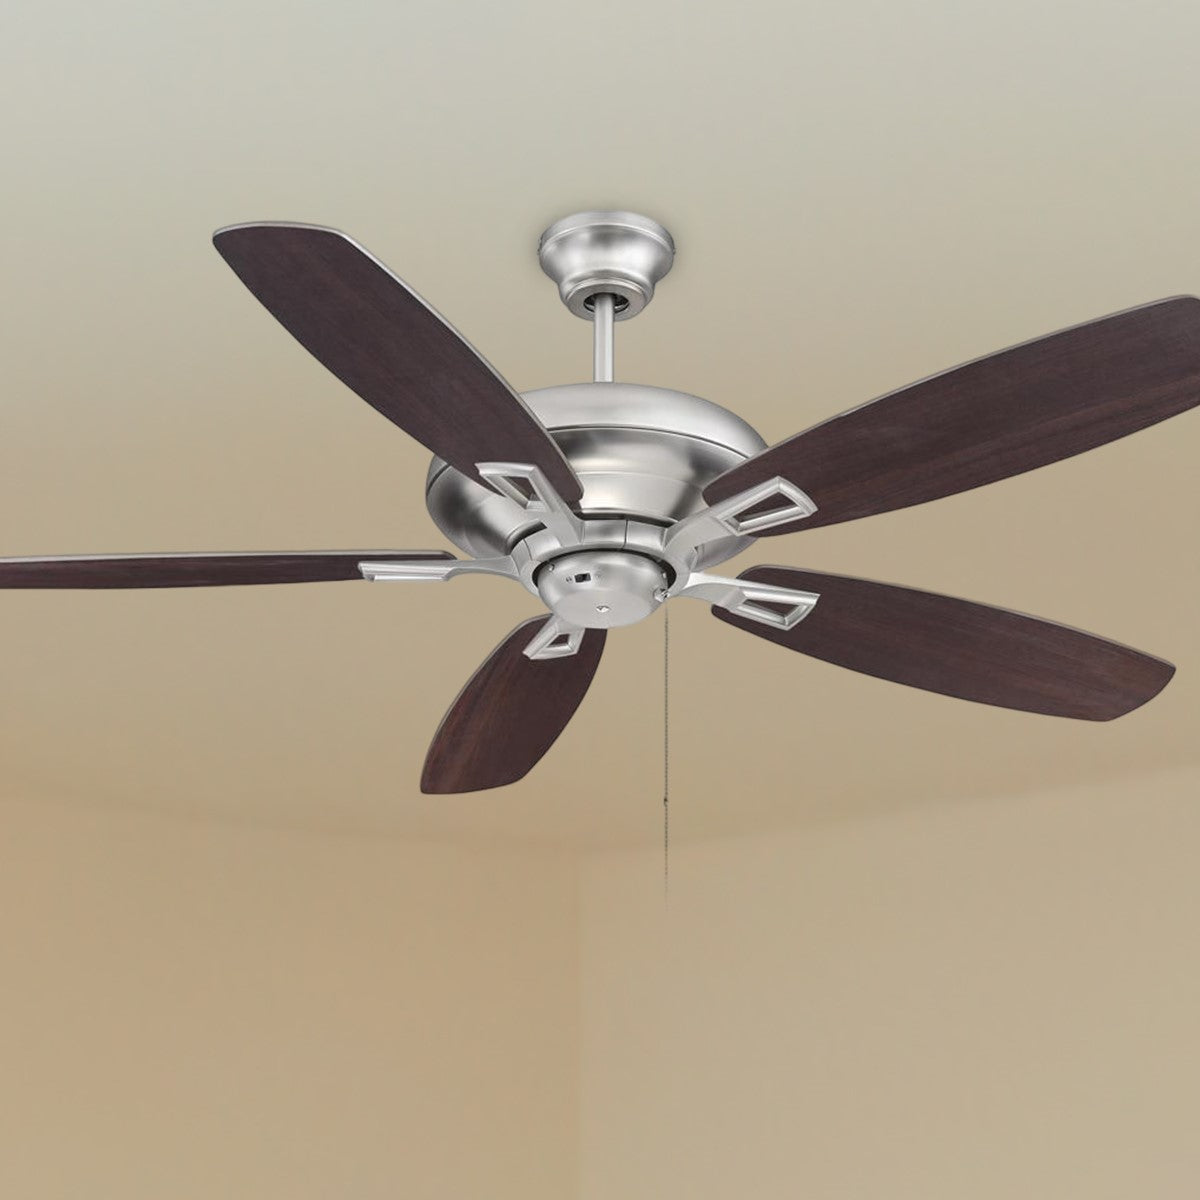 Mystique 52 Inch Satin Nickel Ceiling Fan With Light, 5 Chestnut/Silver Reversible Blades - Bees Lighting